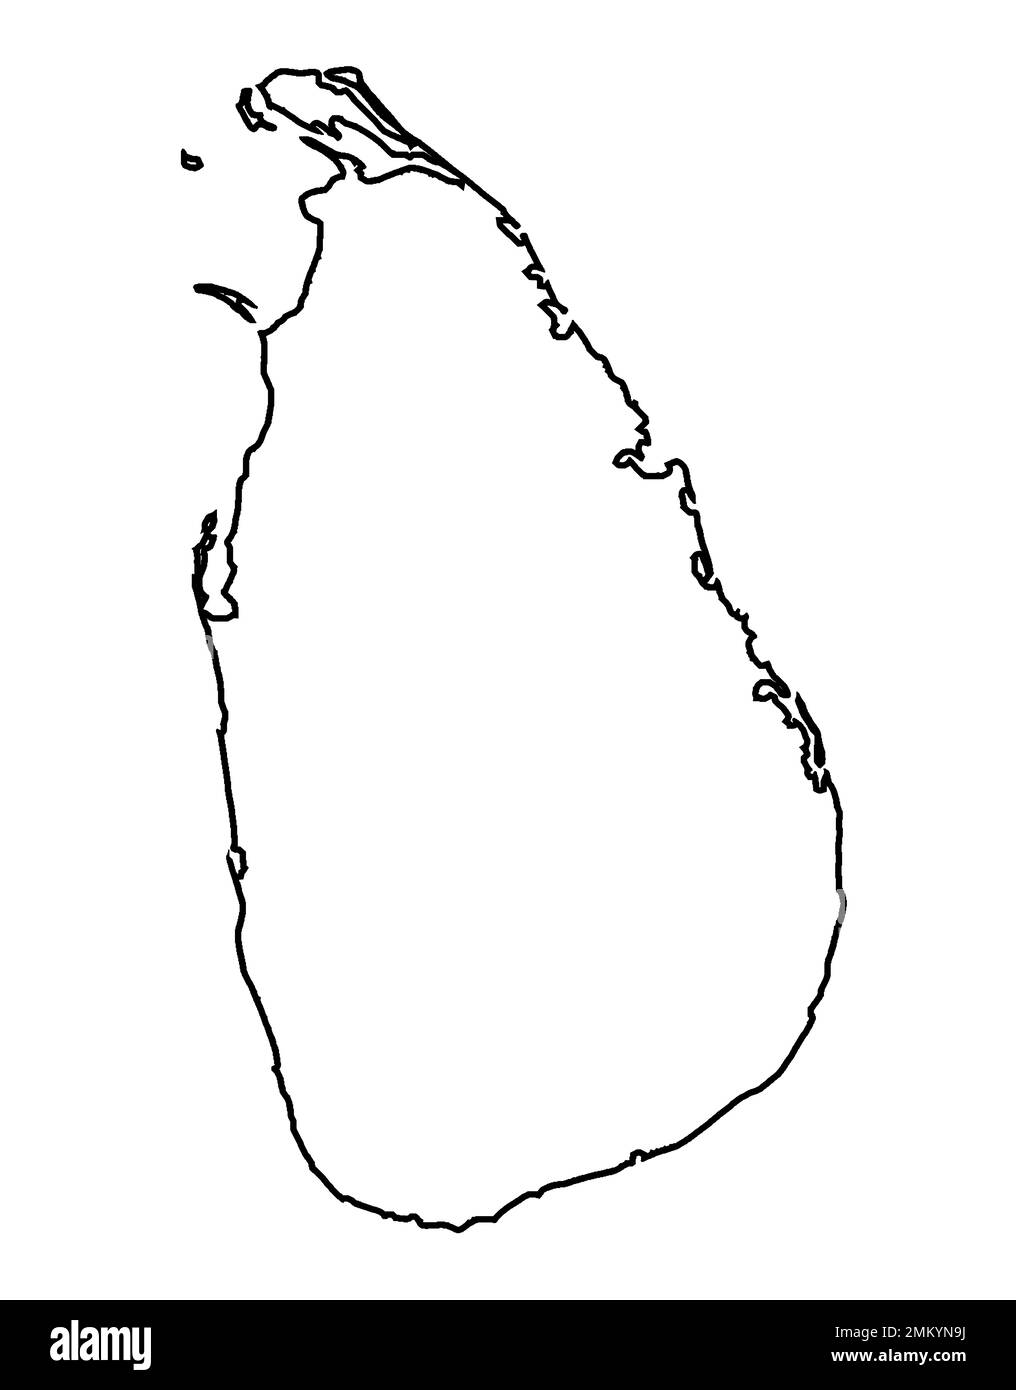 Outline outline silhouette map of Sri Lanka on a white background Stock Photo